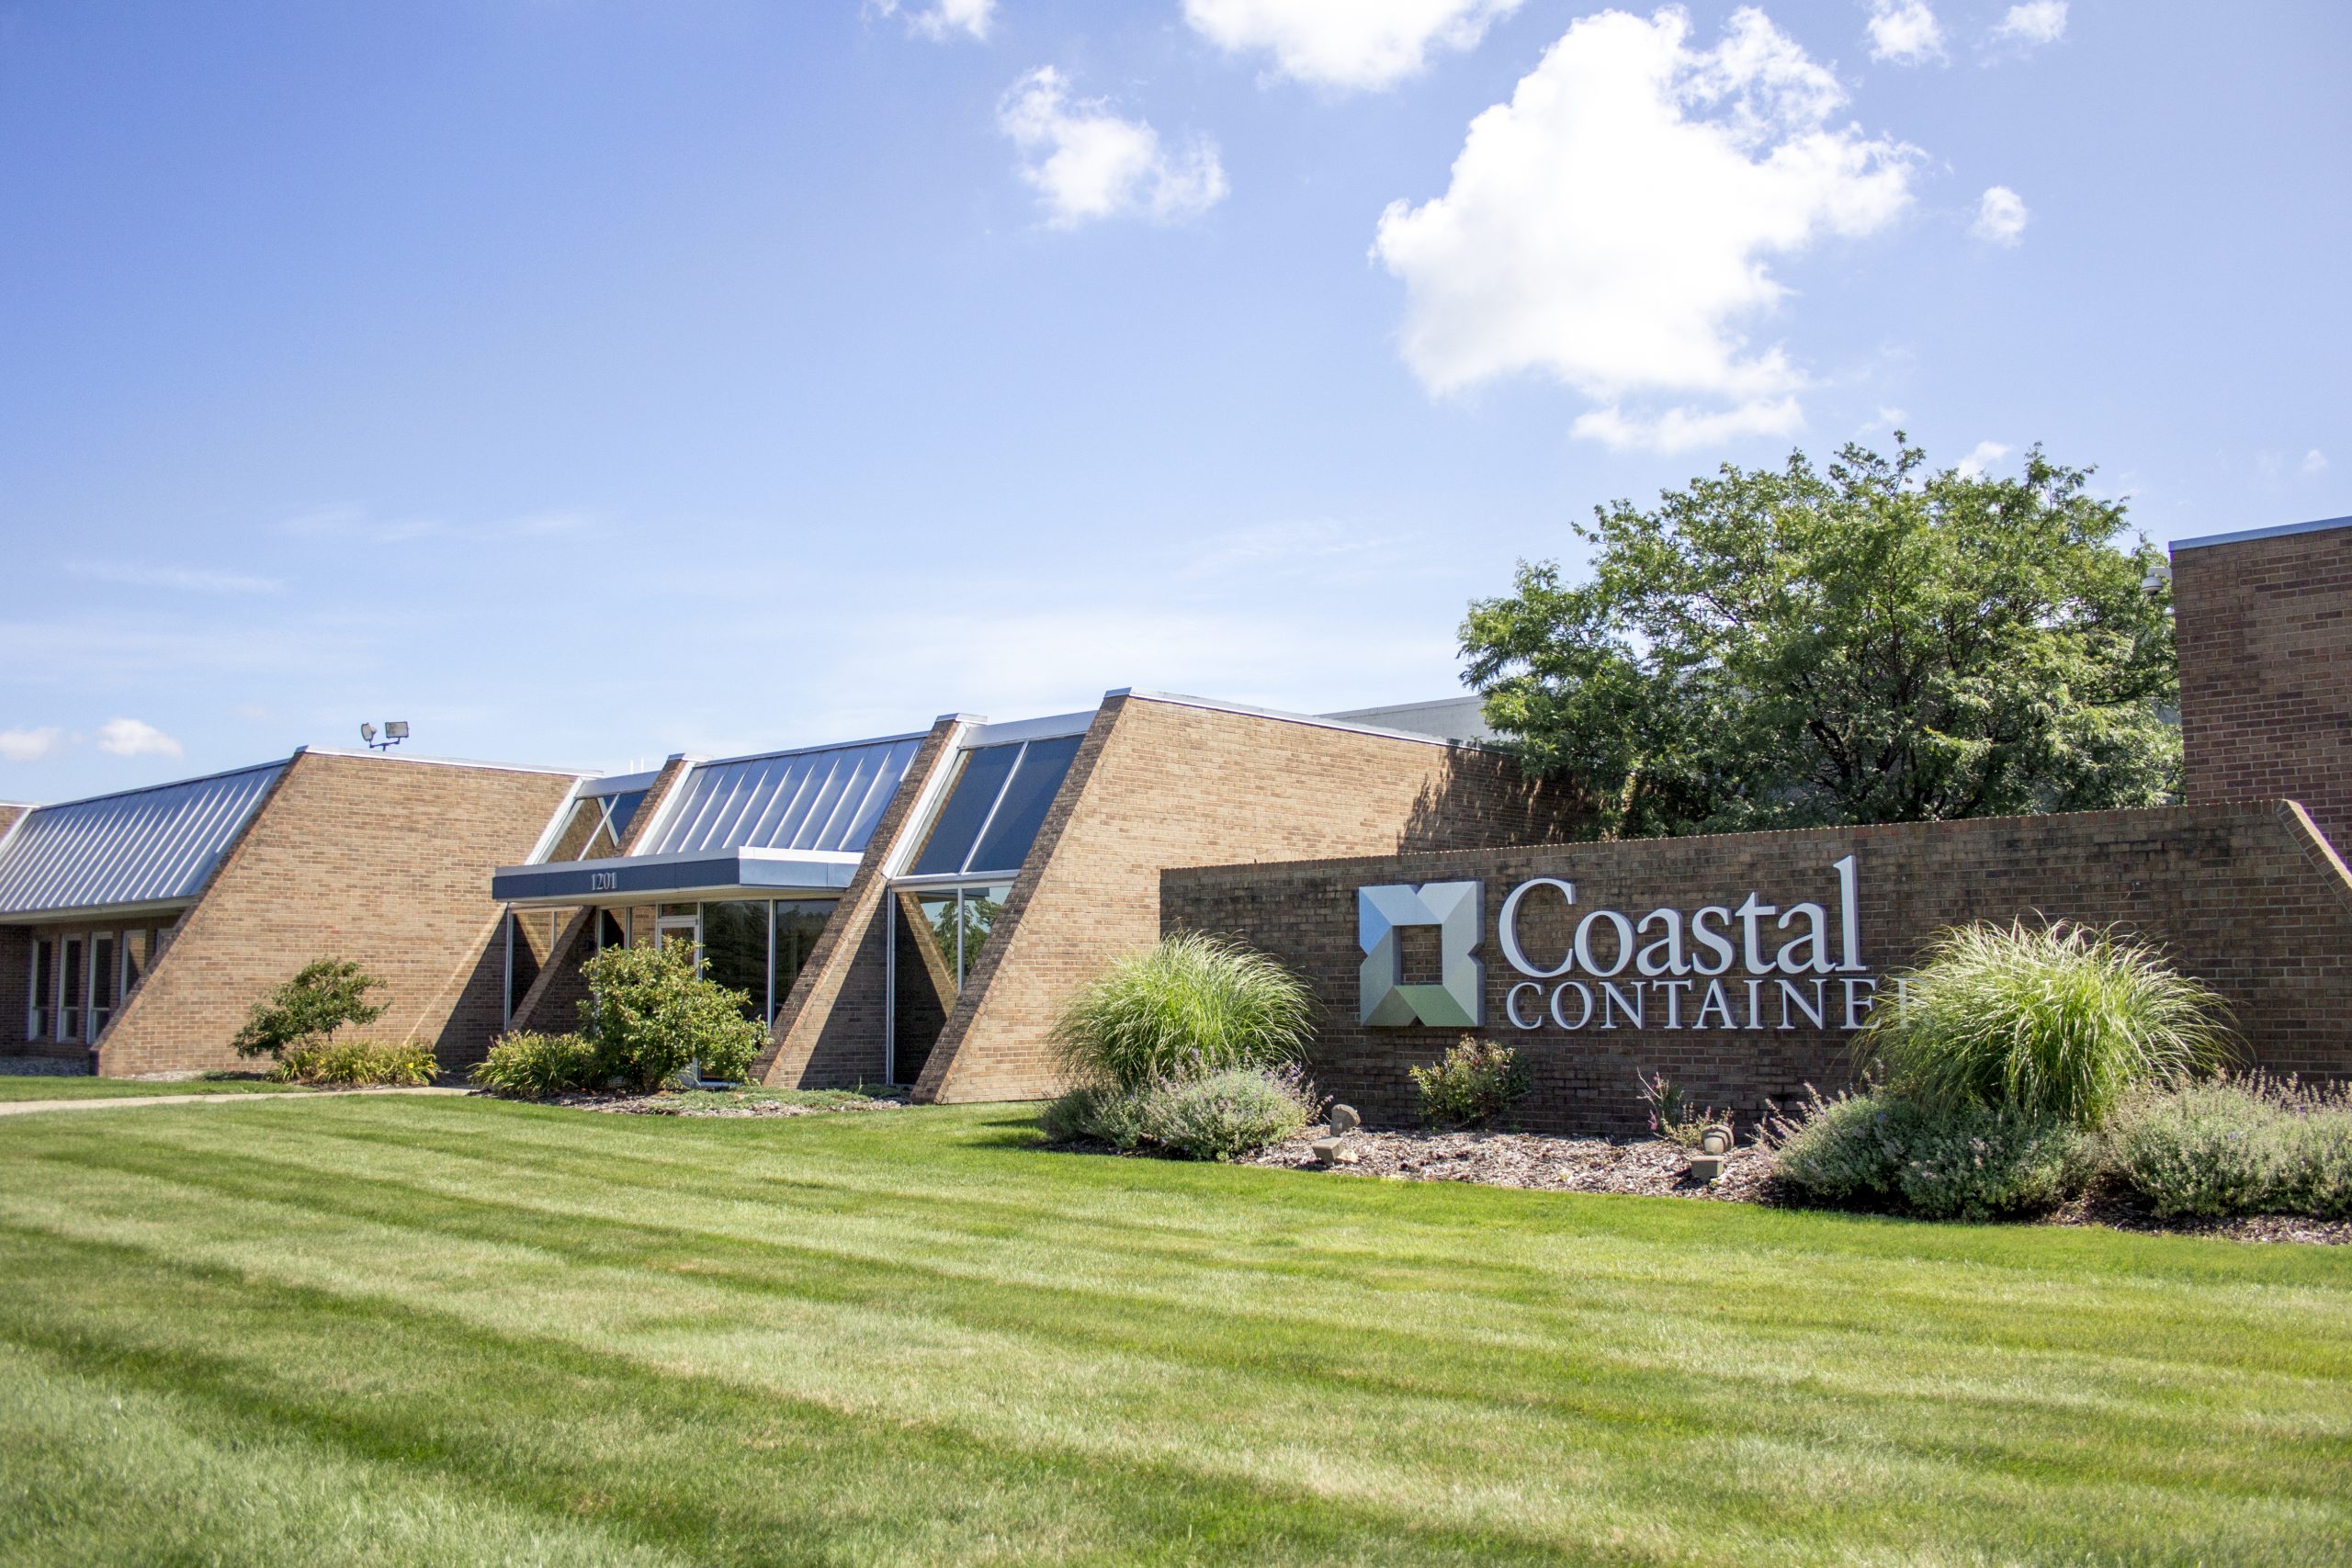 Coastal Container Corporation Expands In The City Of Holland blog image 